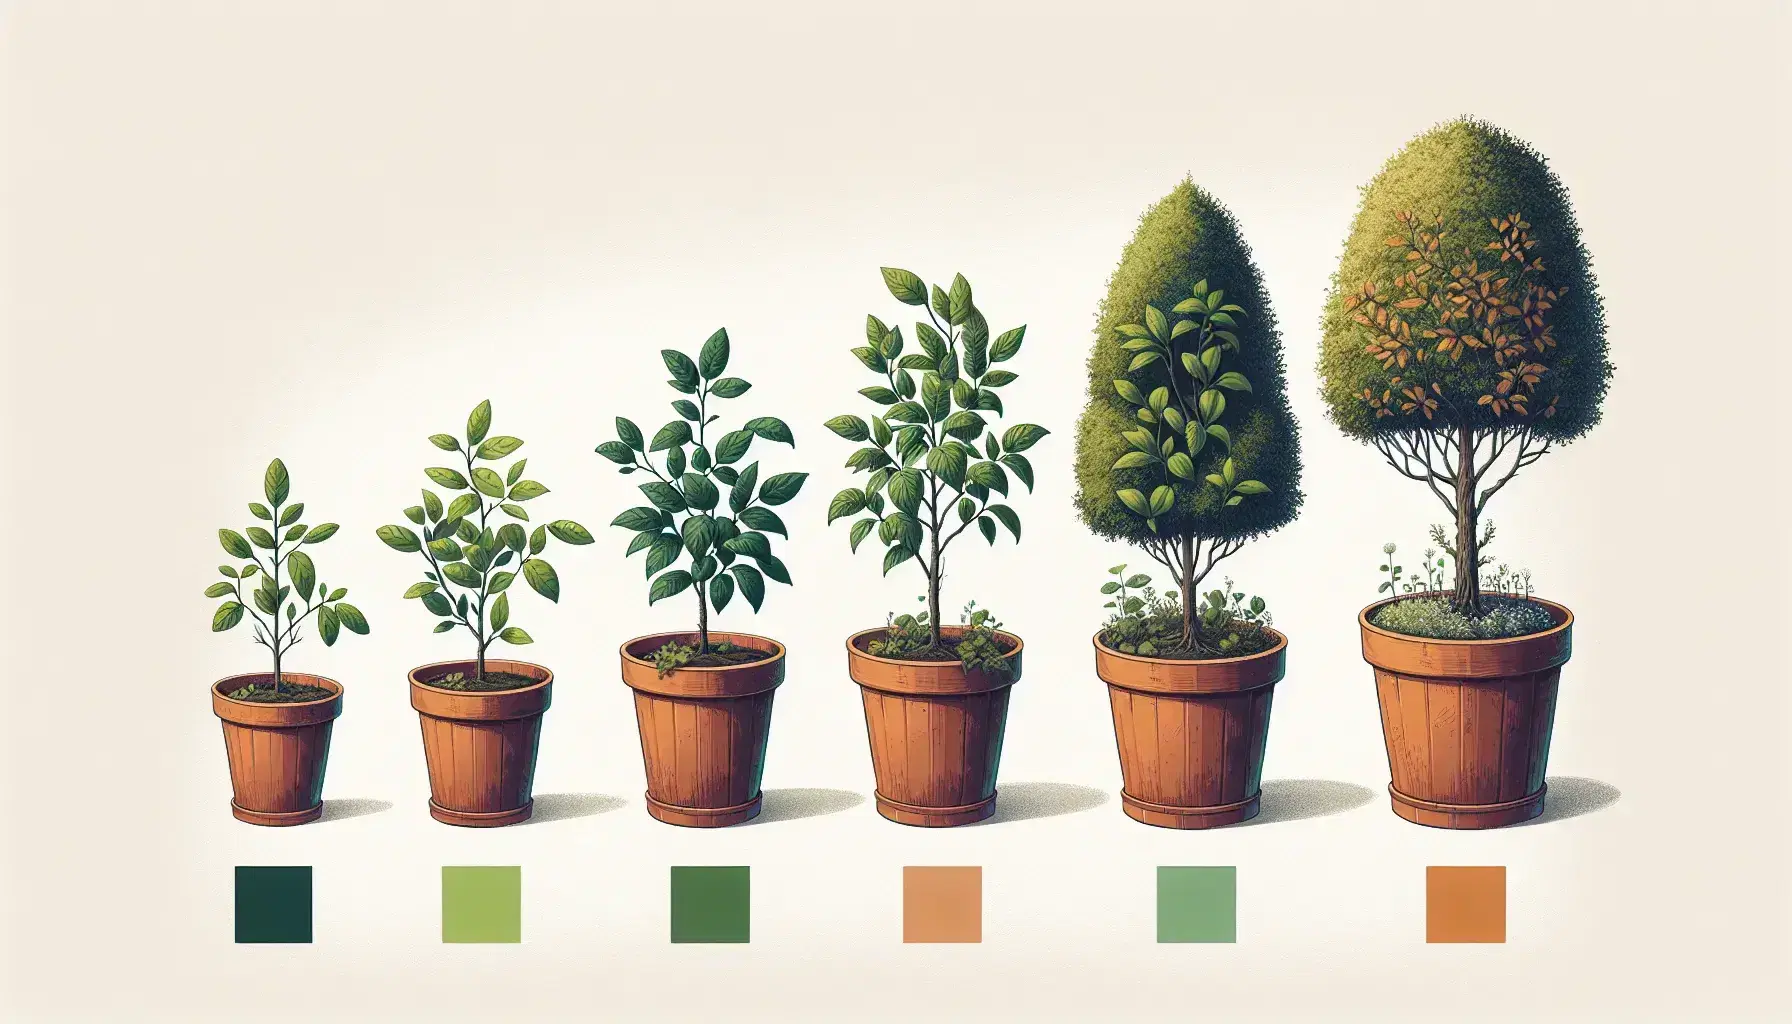 Four plants depicting product life cycle stages, from a vibrant green sapling to a full tree, then a mature tree, ending with a withering tree, all against a light backdrop.